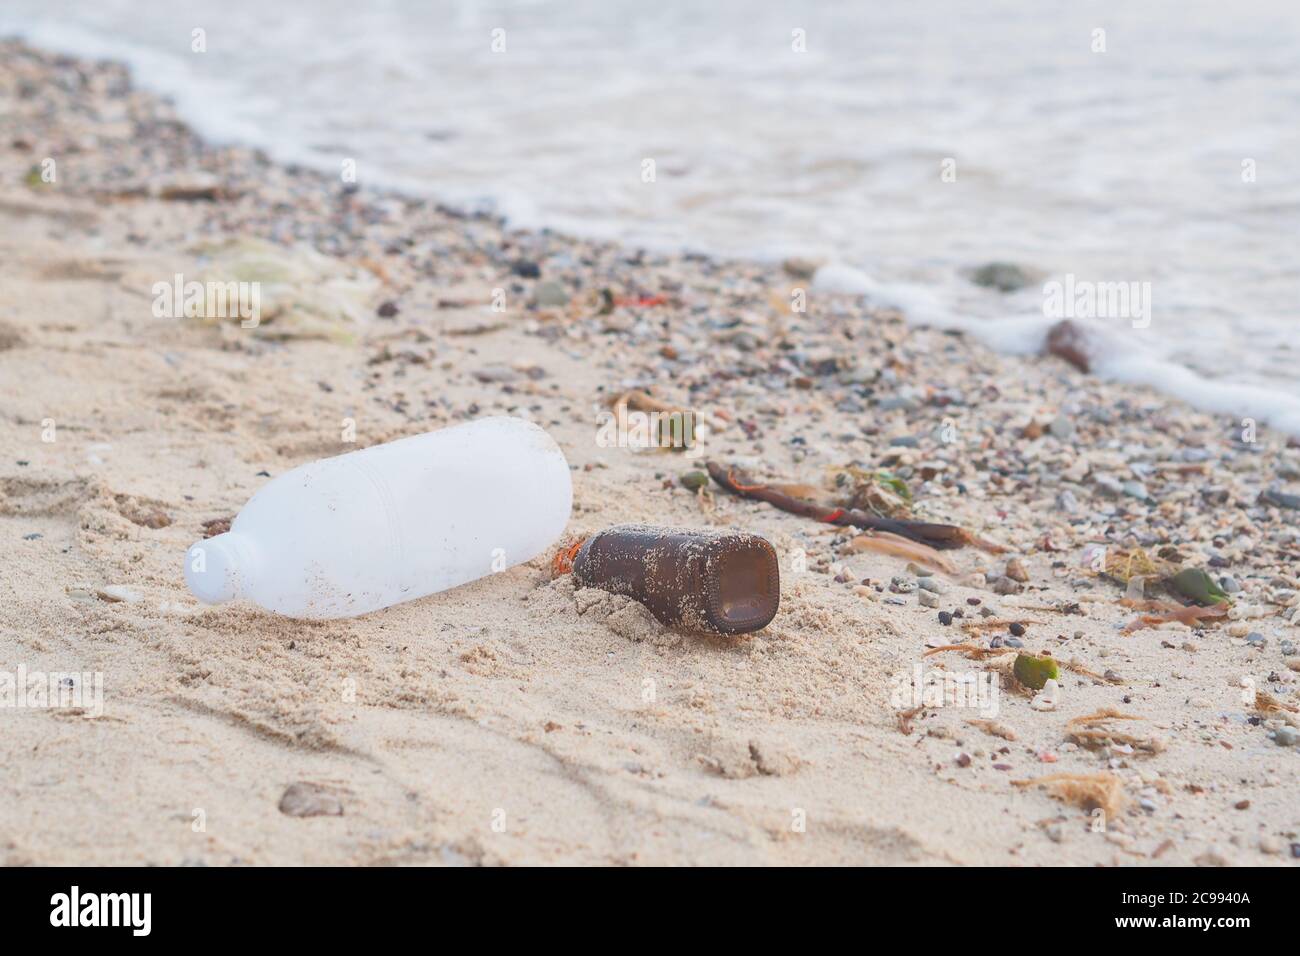 Soft focus on Waste plastic bottles and other types of plastic waste on beach. Stock Photo